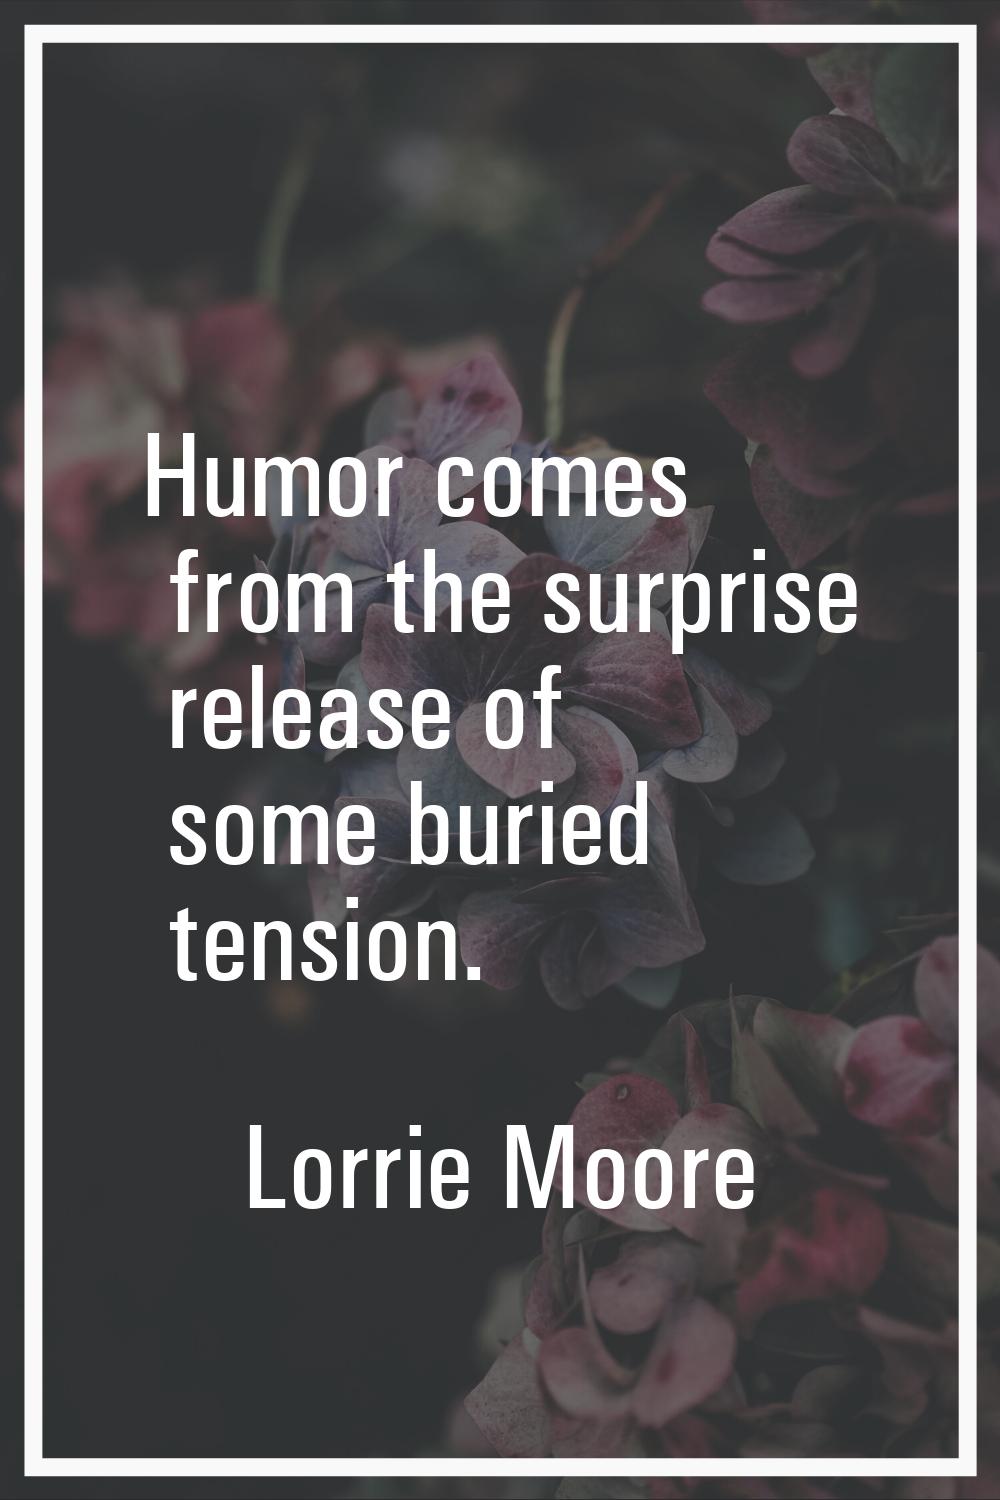 Humor comes from the surprise release of some buried tension.